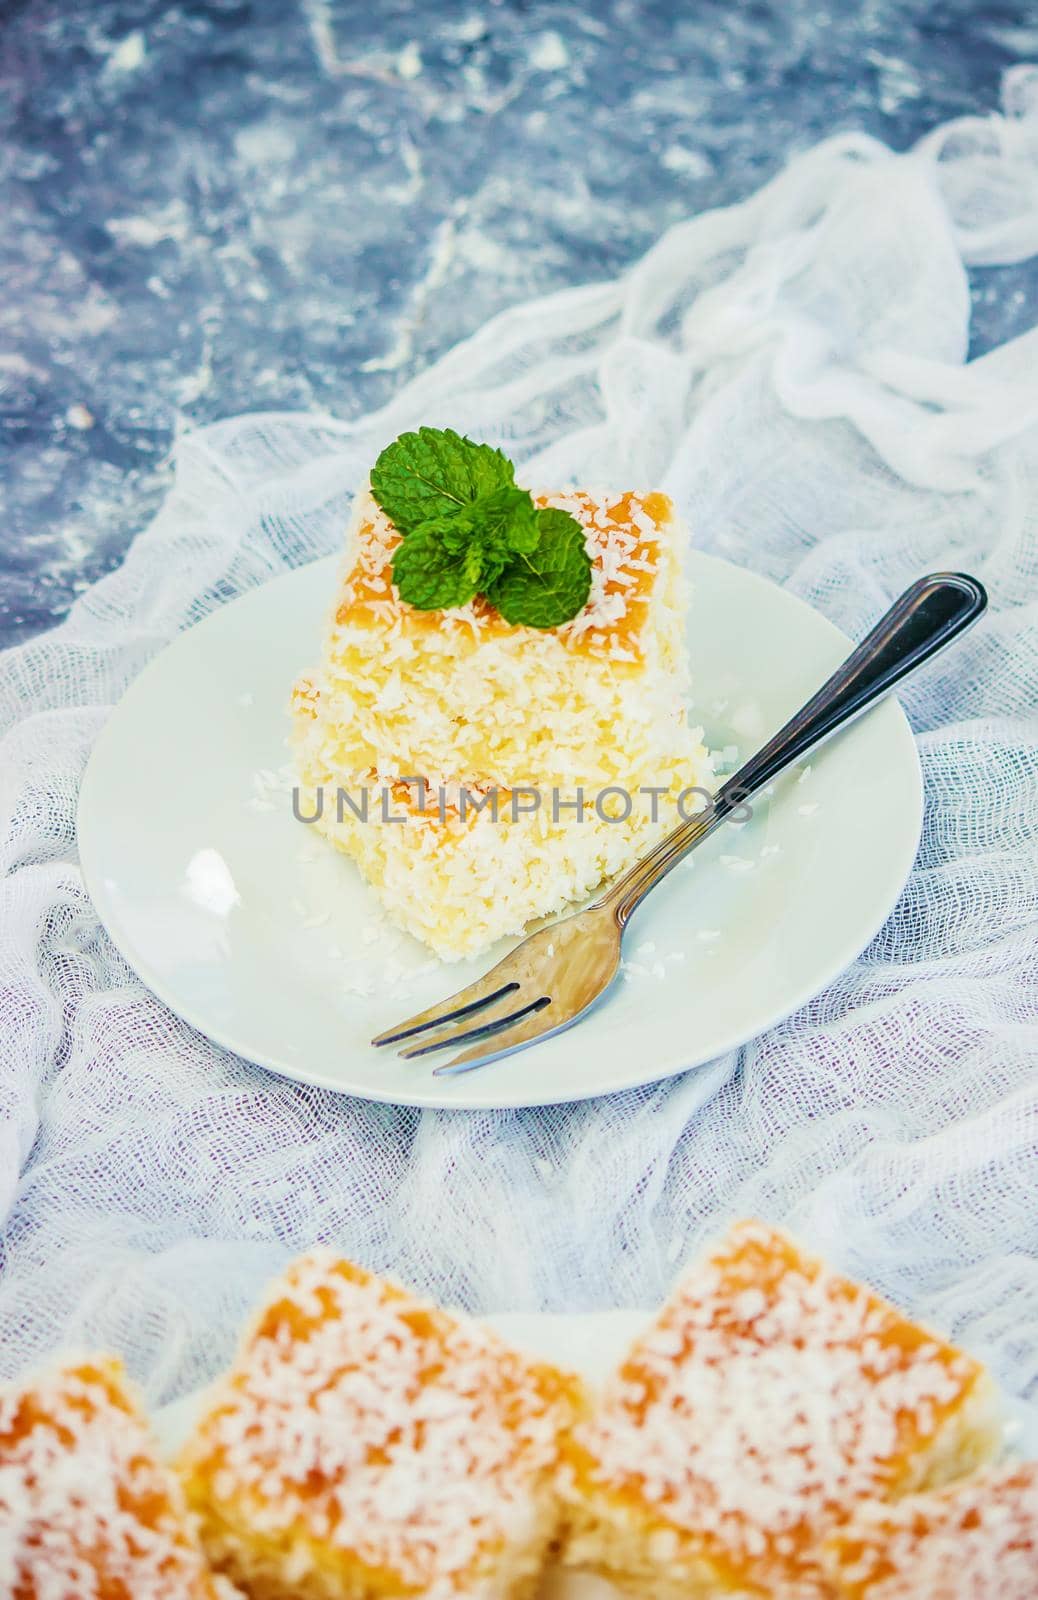 Cakes in coconut shavings. Selective focus. Food.